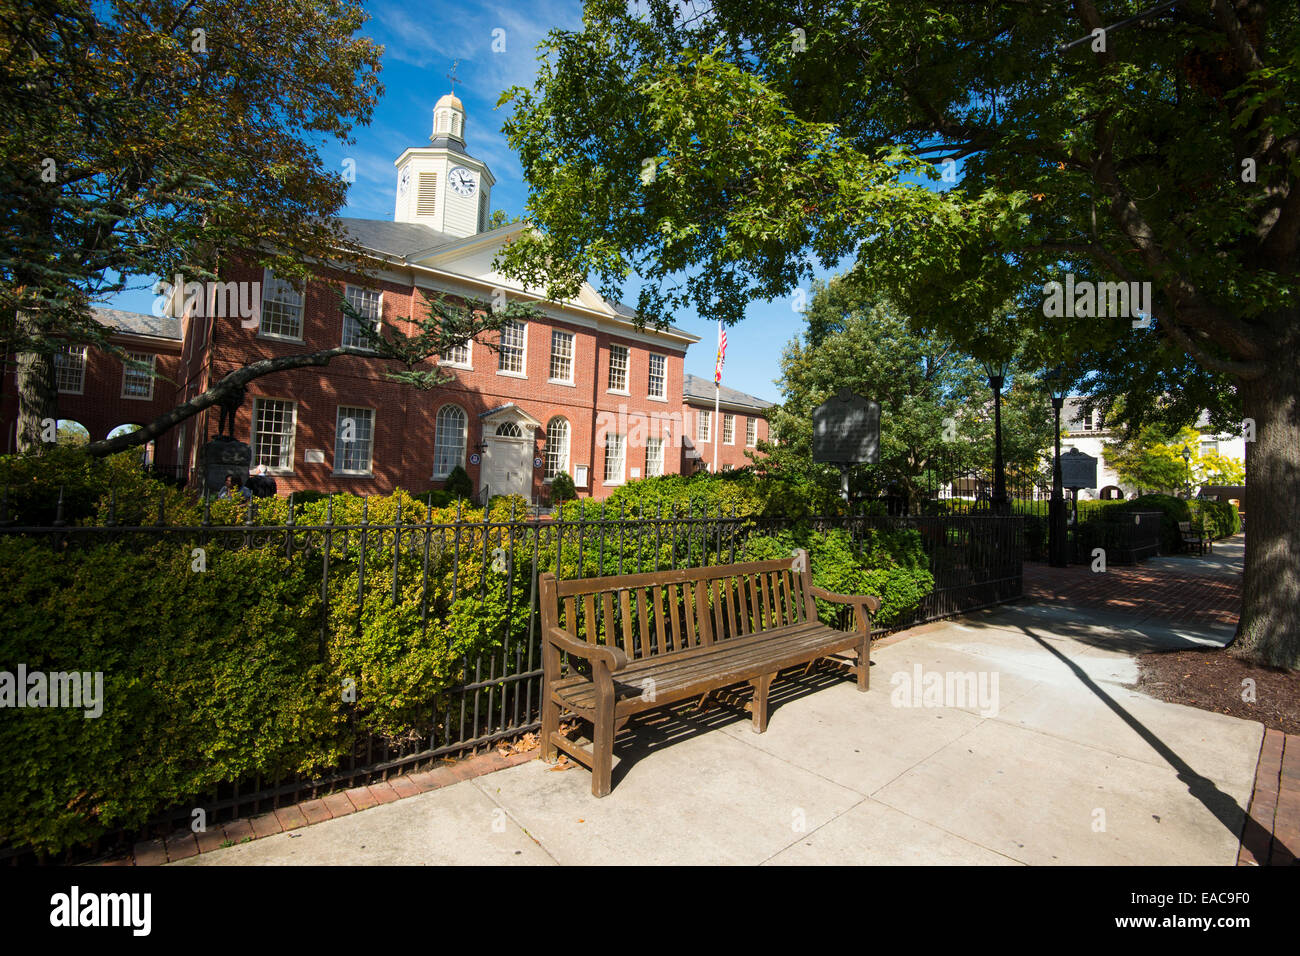 The Talbot County Courthouse in Easton, Maryland USA Stock Photo